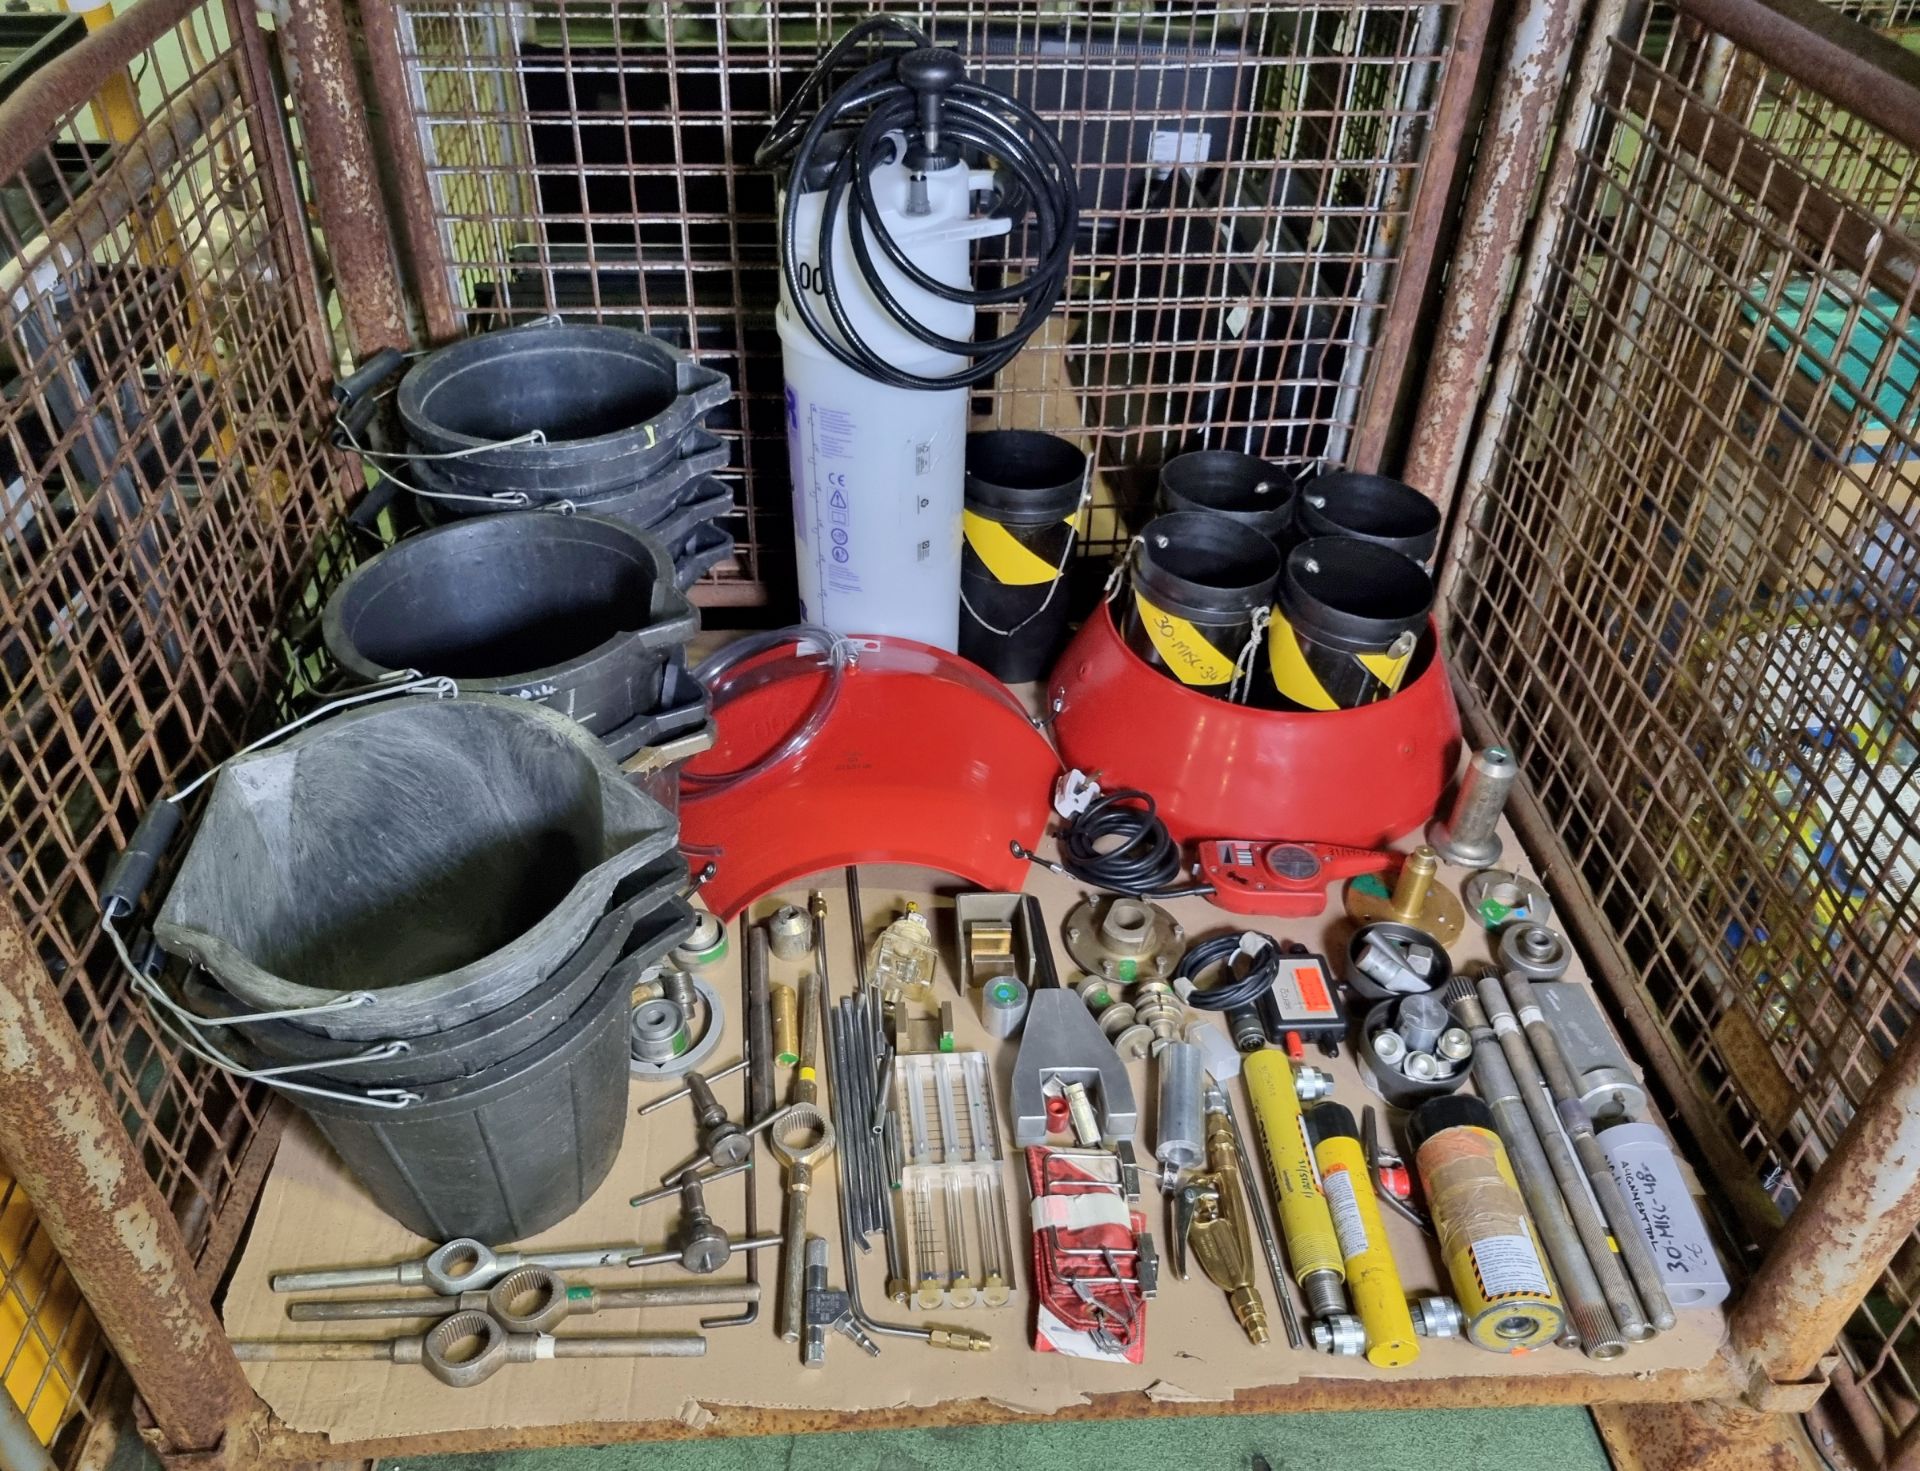 Workshop tools and equipment - alignment tools, utility buckets, pressure tank, engraver kit - Image 2 of 6